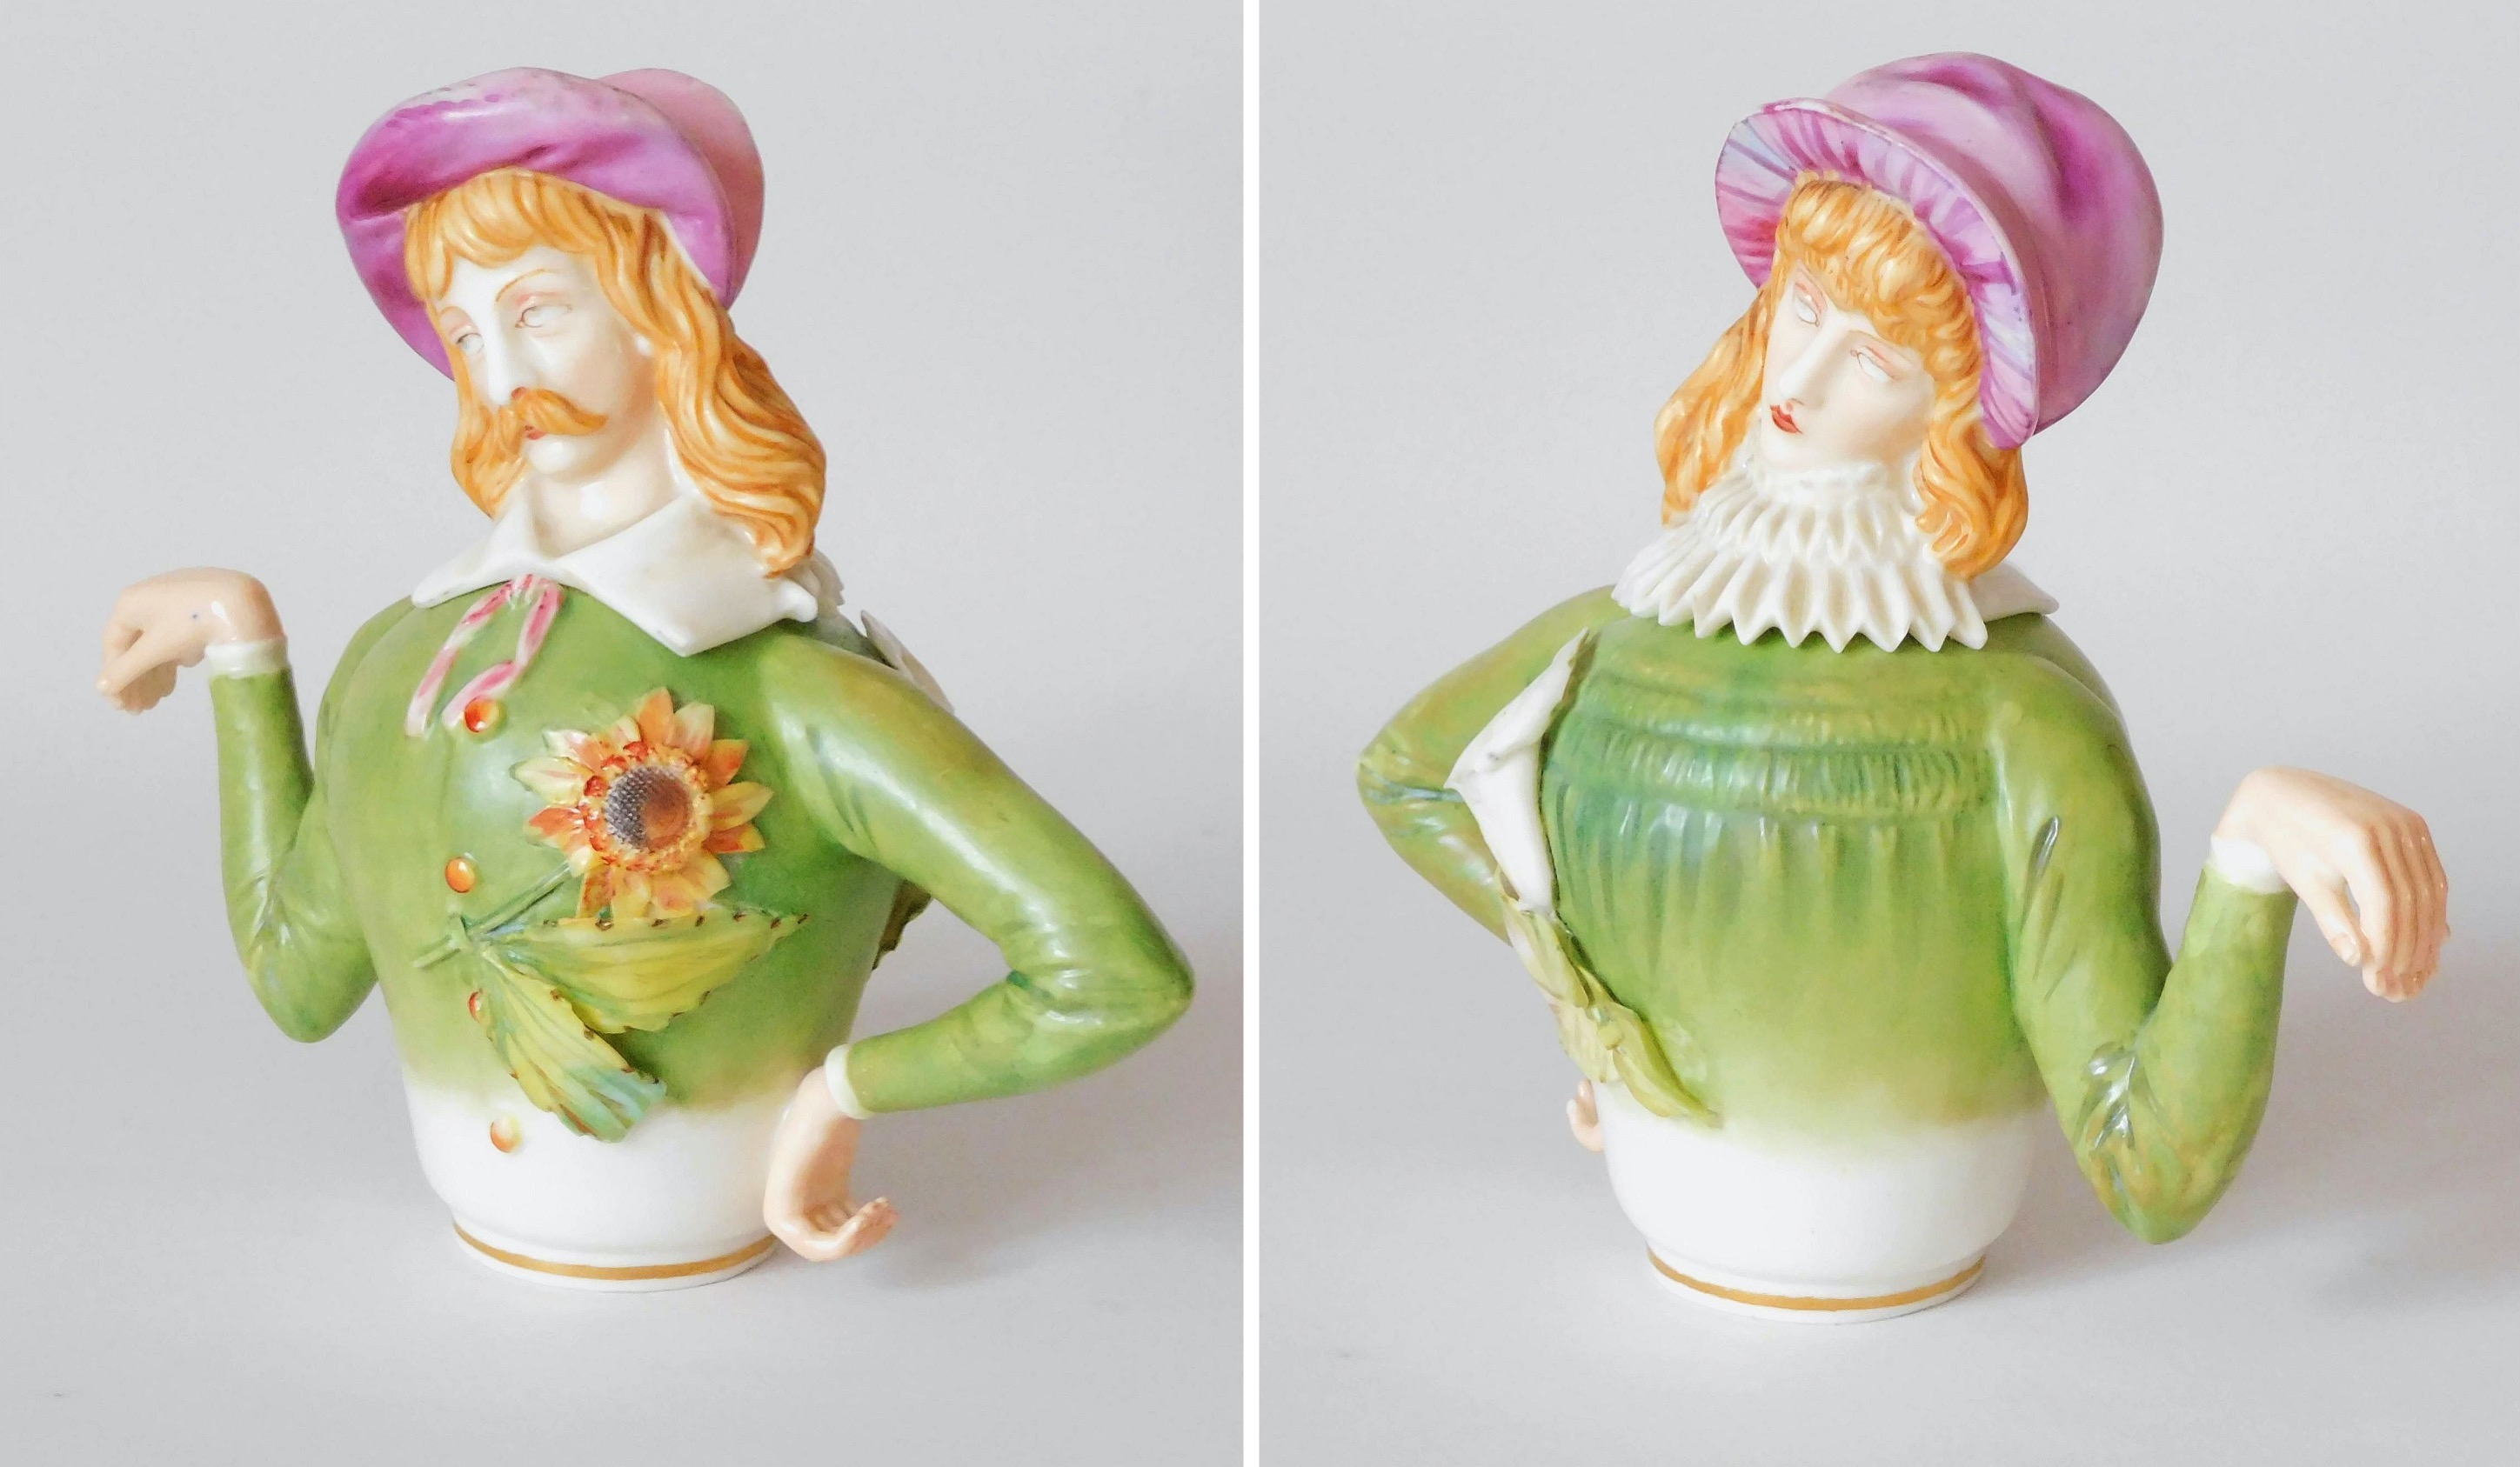 front and back of a teapot shaped like a person